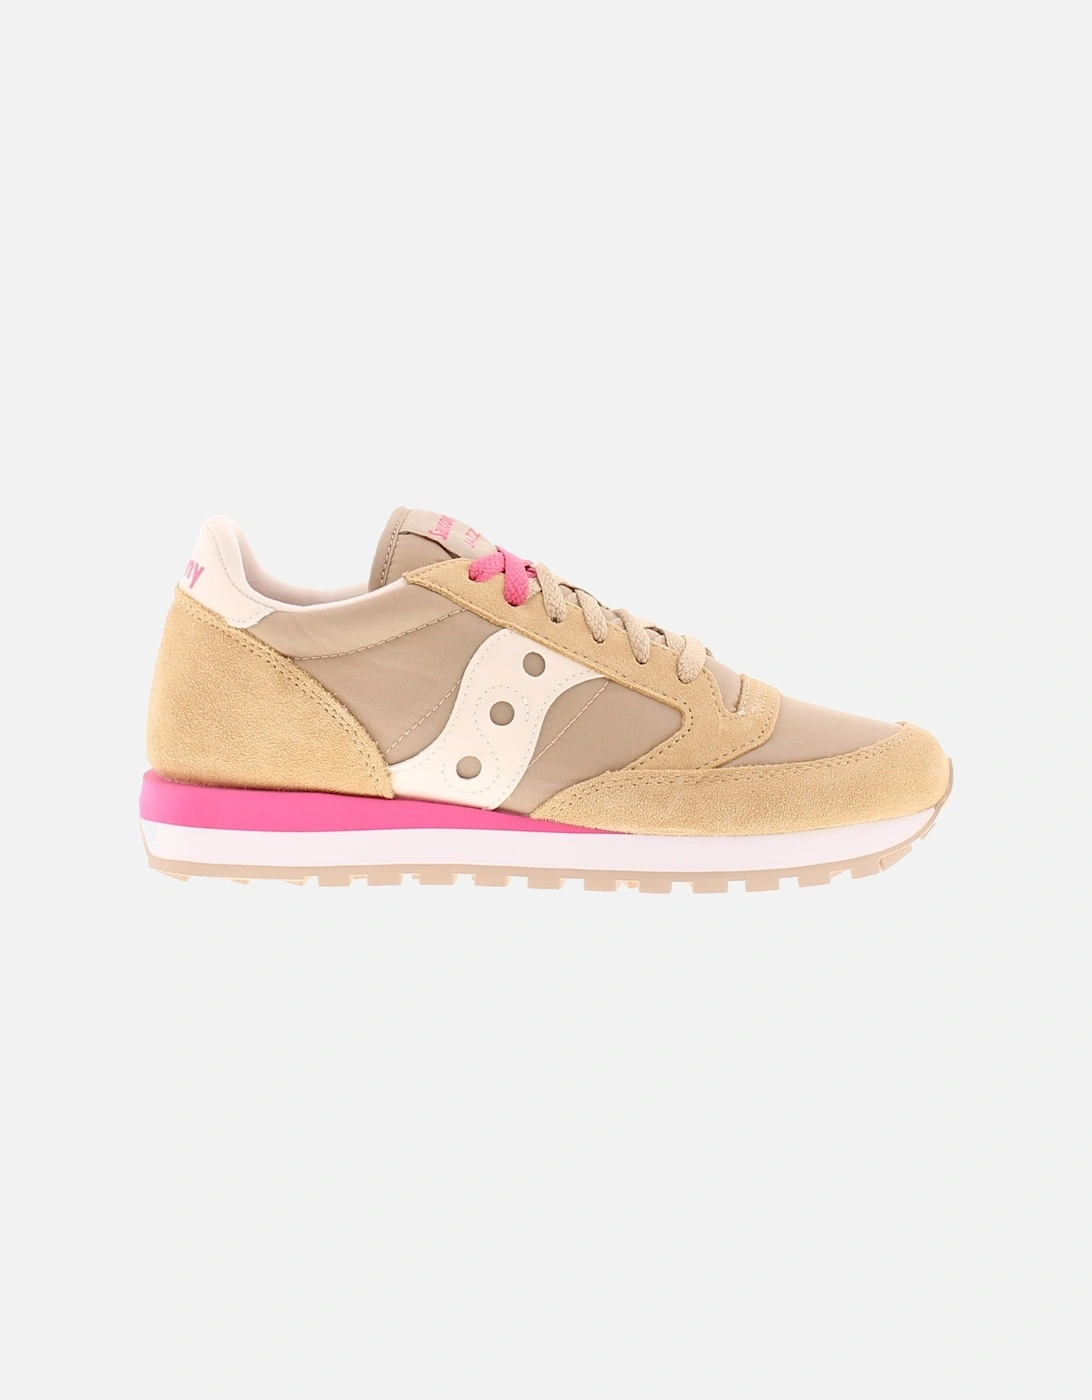 Womens Trainers Jazz Original Lace Up beige white pink UK Size